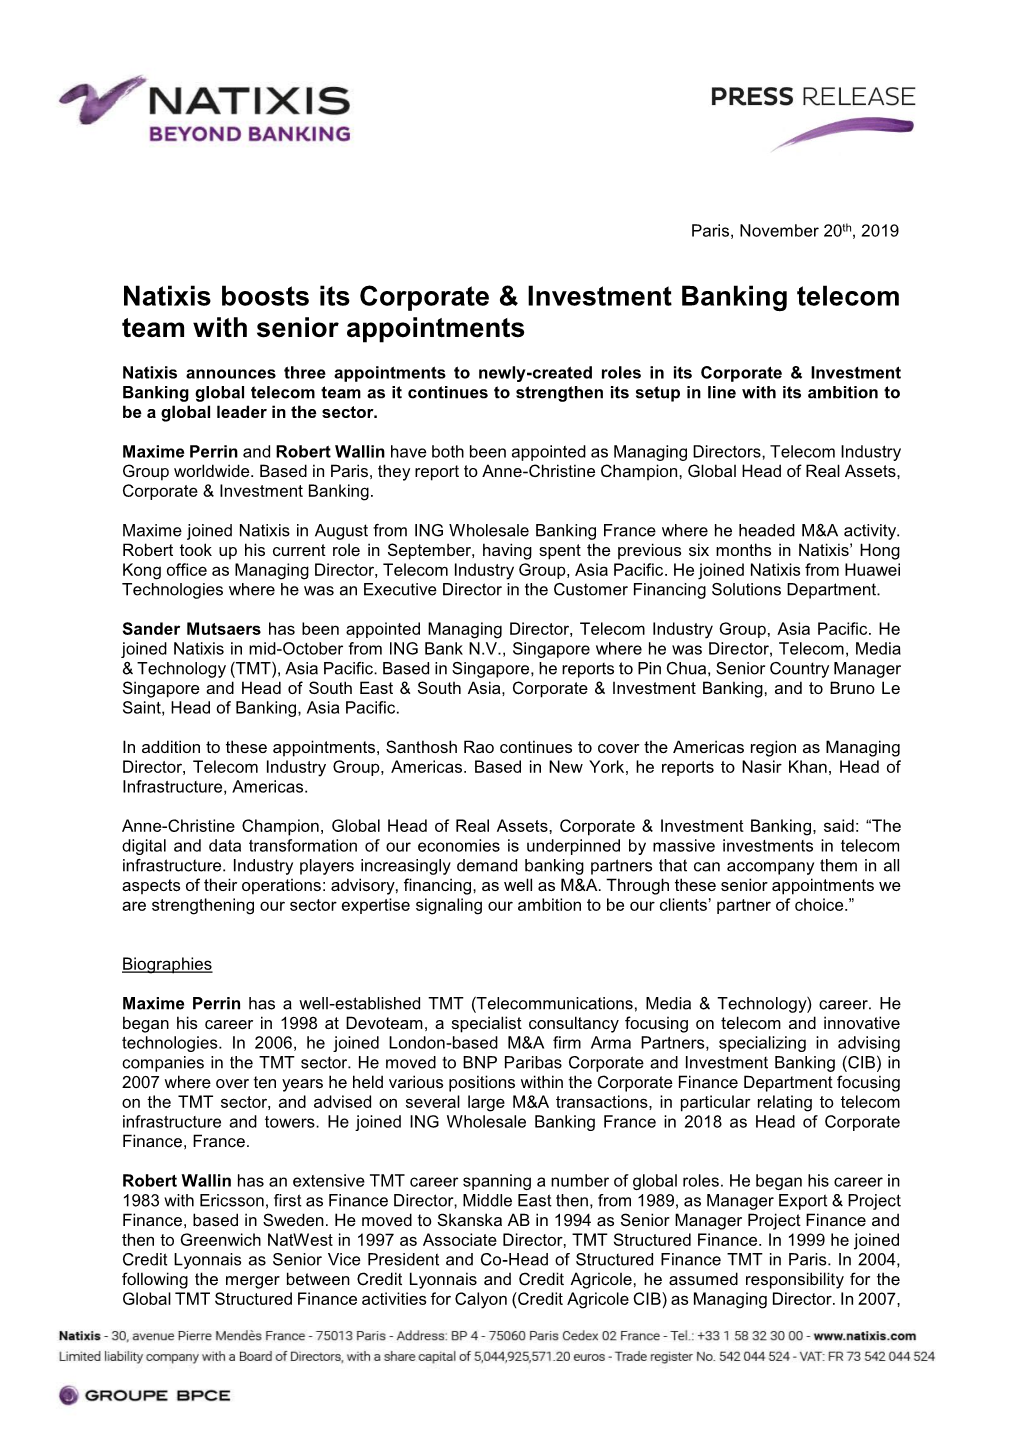 Natixis Boosts Its Corporate & Investment Banking Telecom Team